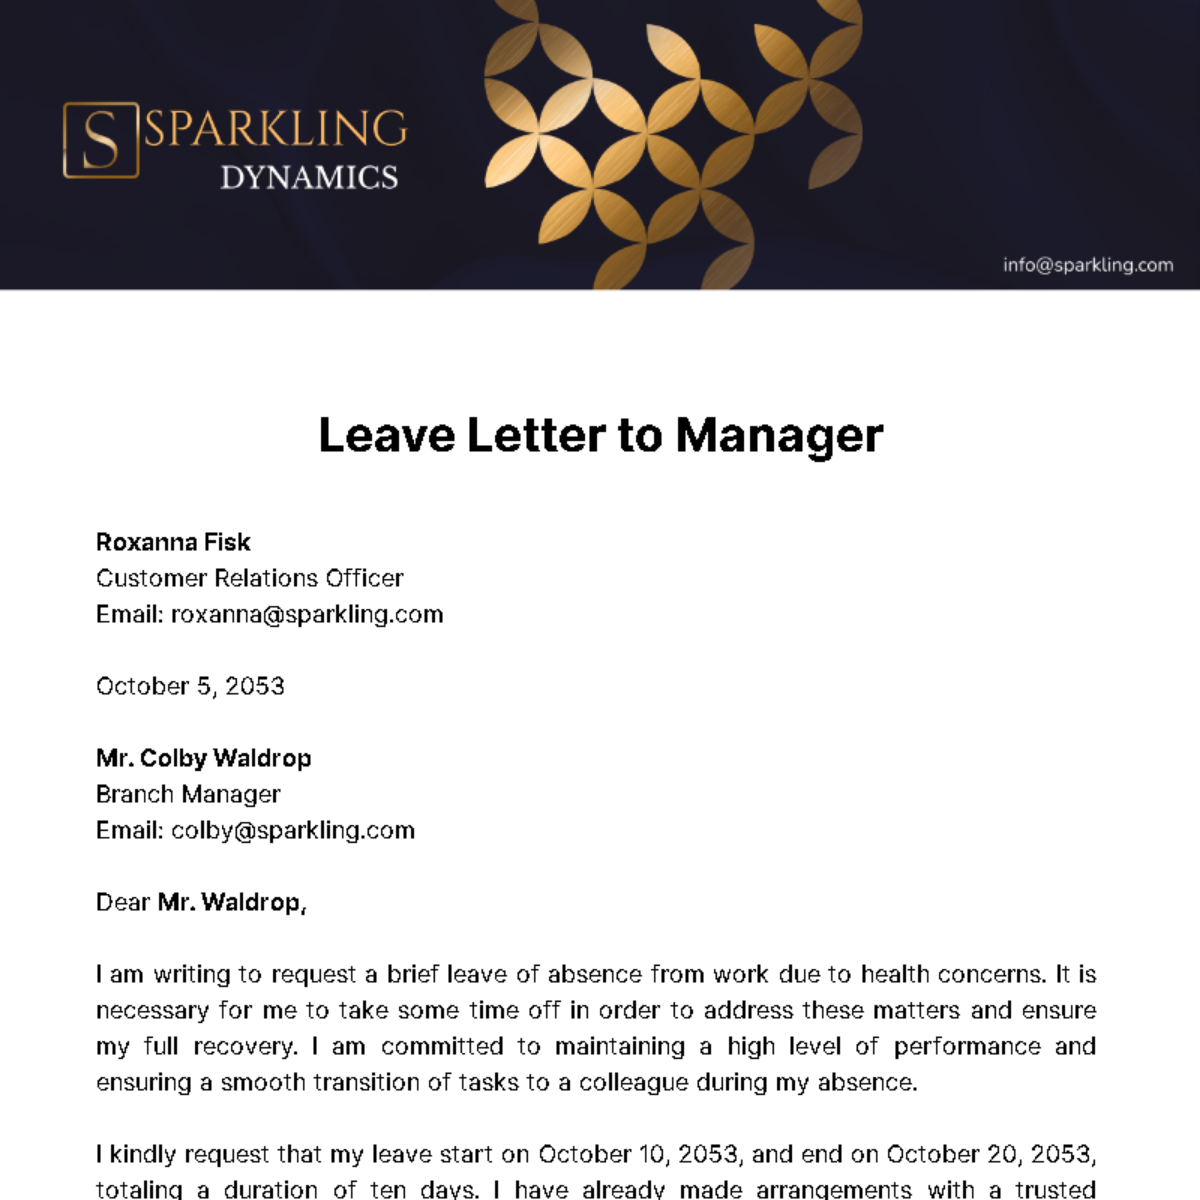 Leave Letter to Manager Template